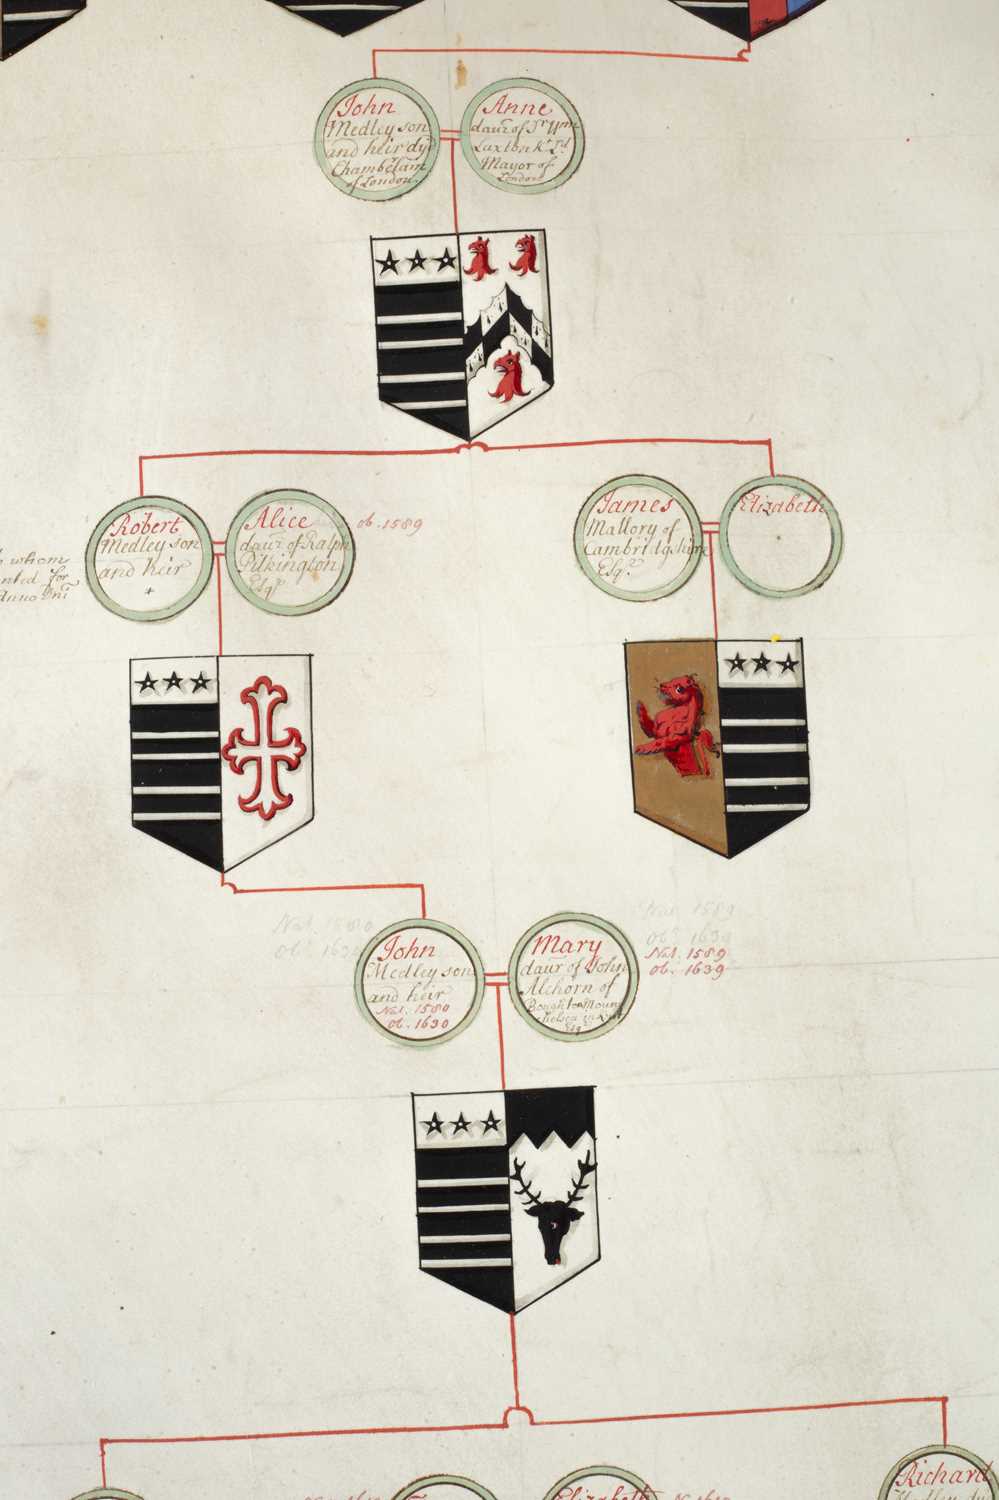 Vellum Scroll of 'The Genealogy of the antient family of Medley of Warwickshire' - Image 7 of 12